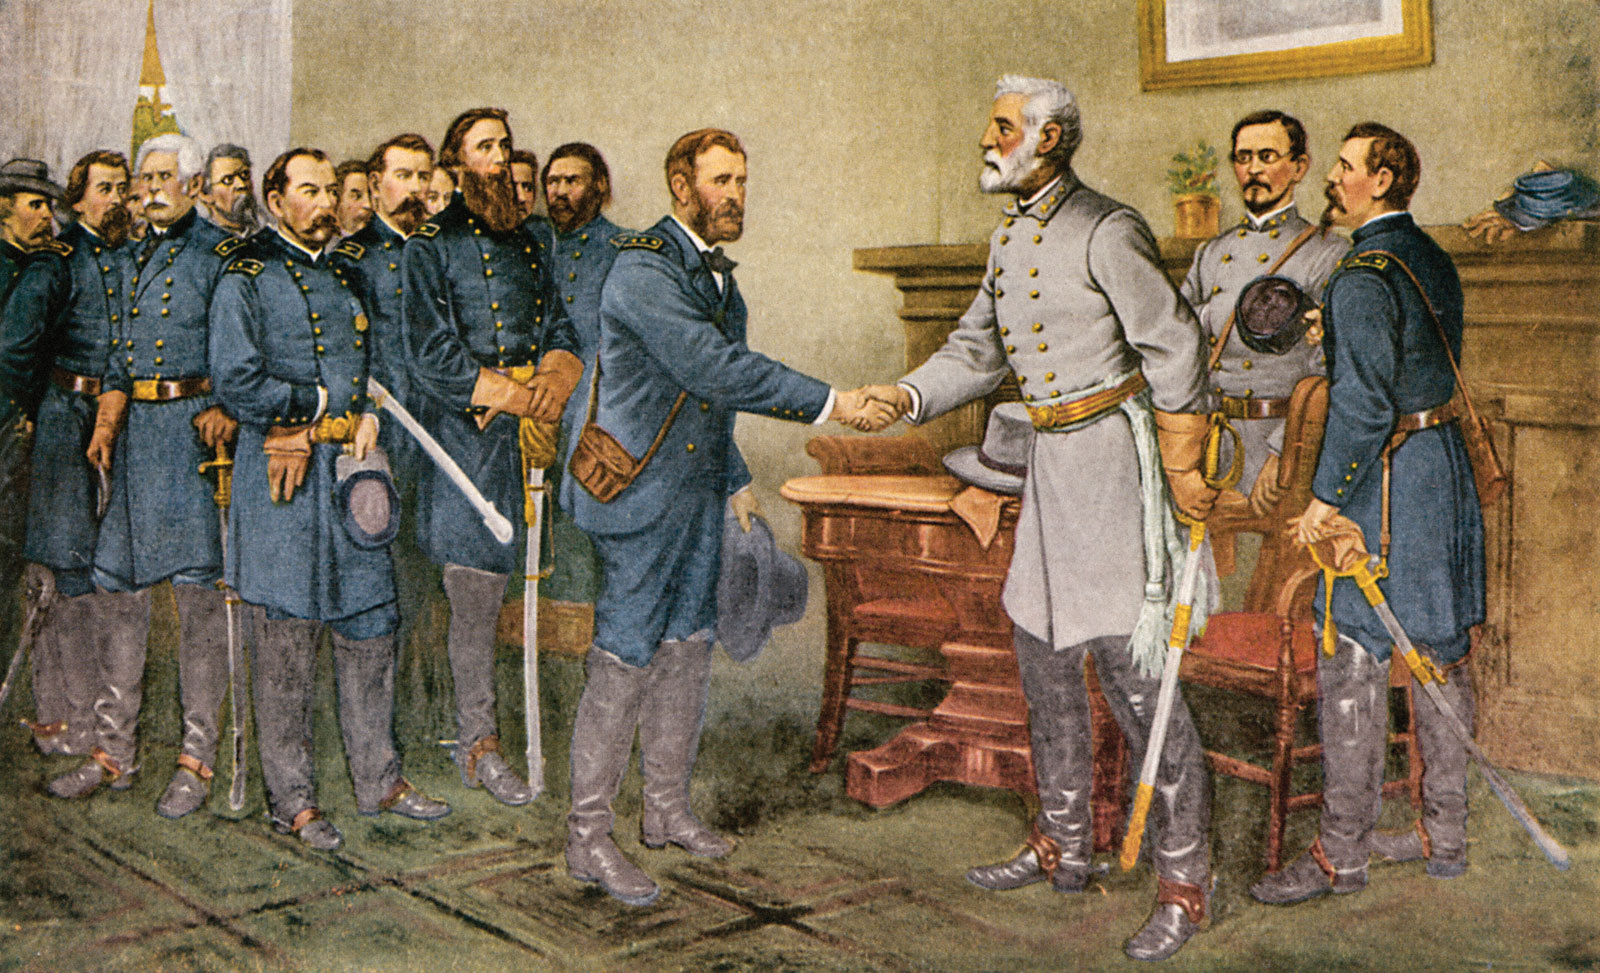  Lee's surrender 1865. 'Peace in Union.' The surrender of General Lee to General Grant at Appomattox Court House, Virginia, 9 April 1865. Reproduction of a painting by Thomas Nast.